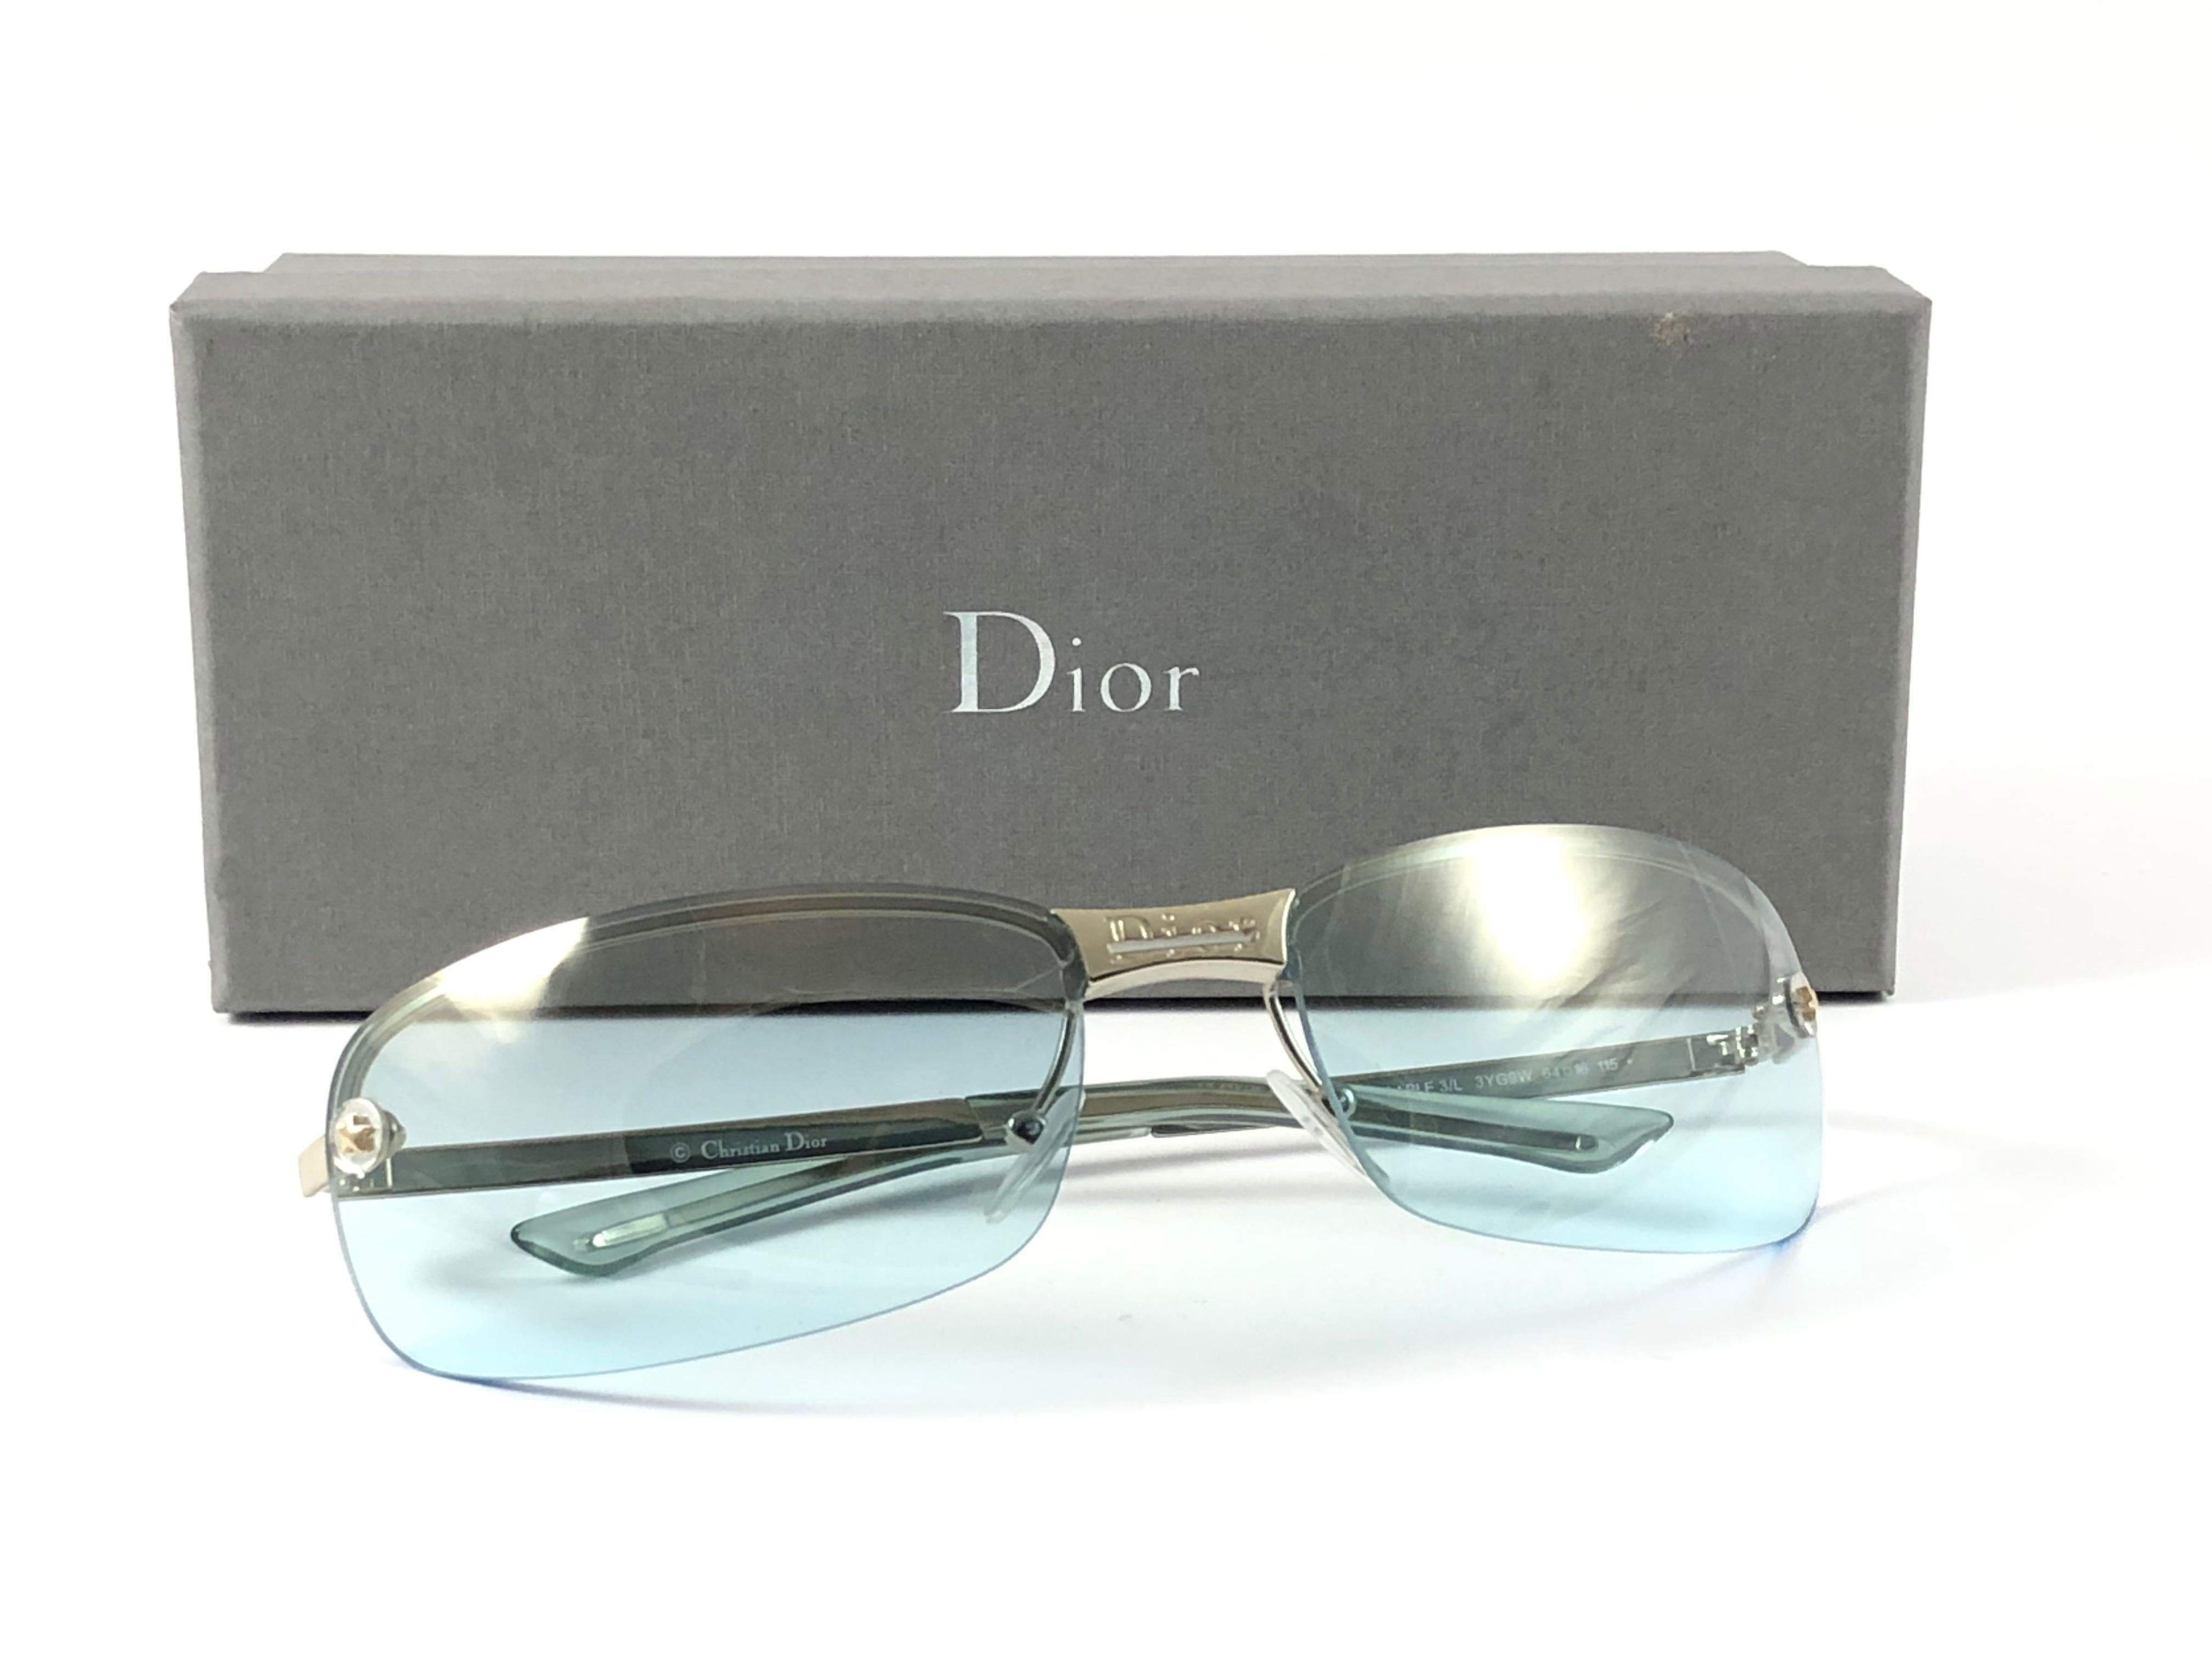 Vintage Christian Dior Adiorable silver with light mirrored turquoise lenses Wrap Sunglasses Fall 2000 by Galliano.

Made in Austria.
 
This piece show minor sign of wear due to  storage.

Front : 16 cms

Lens Height : 6.5 cms

Lens Width : 3.6 cms 